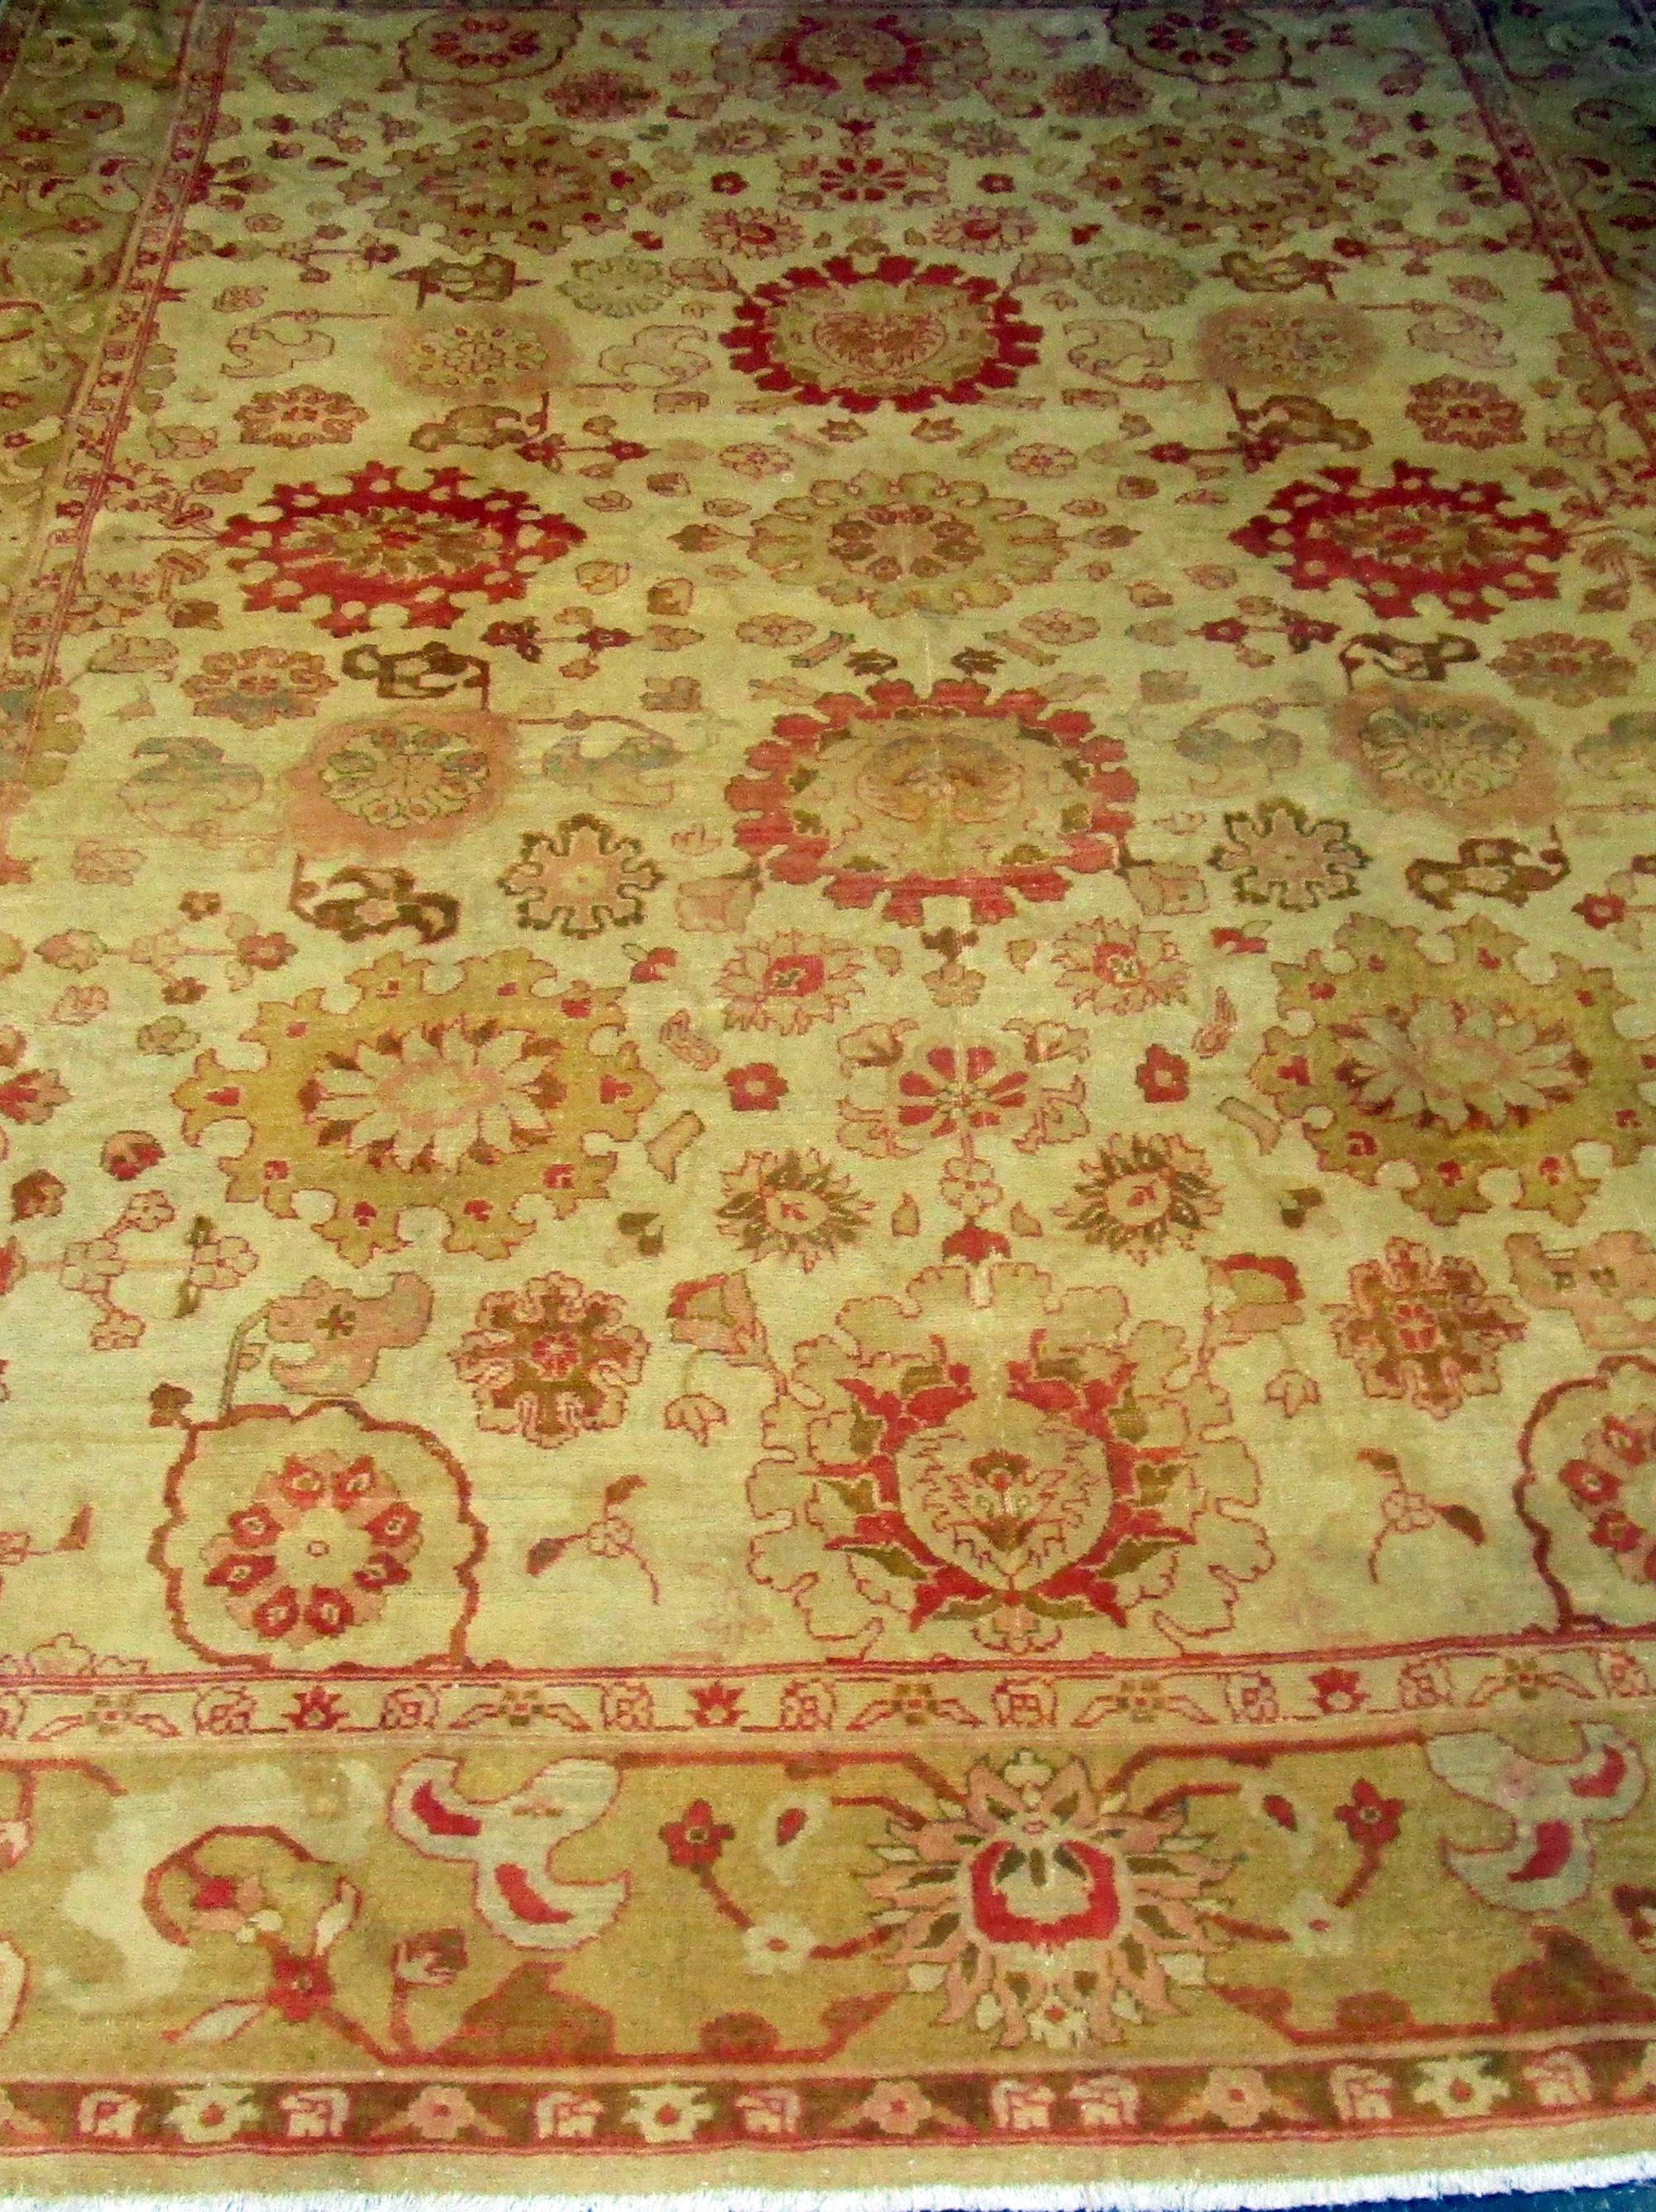 Rare antique Oushak large sized rug of the Turkish family featuring a pronounced abrash (original die color variation or differing color patterns, colorations, and various shades or hues within a rug. It is one of the most common and typical